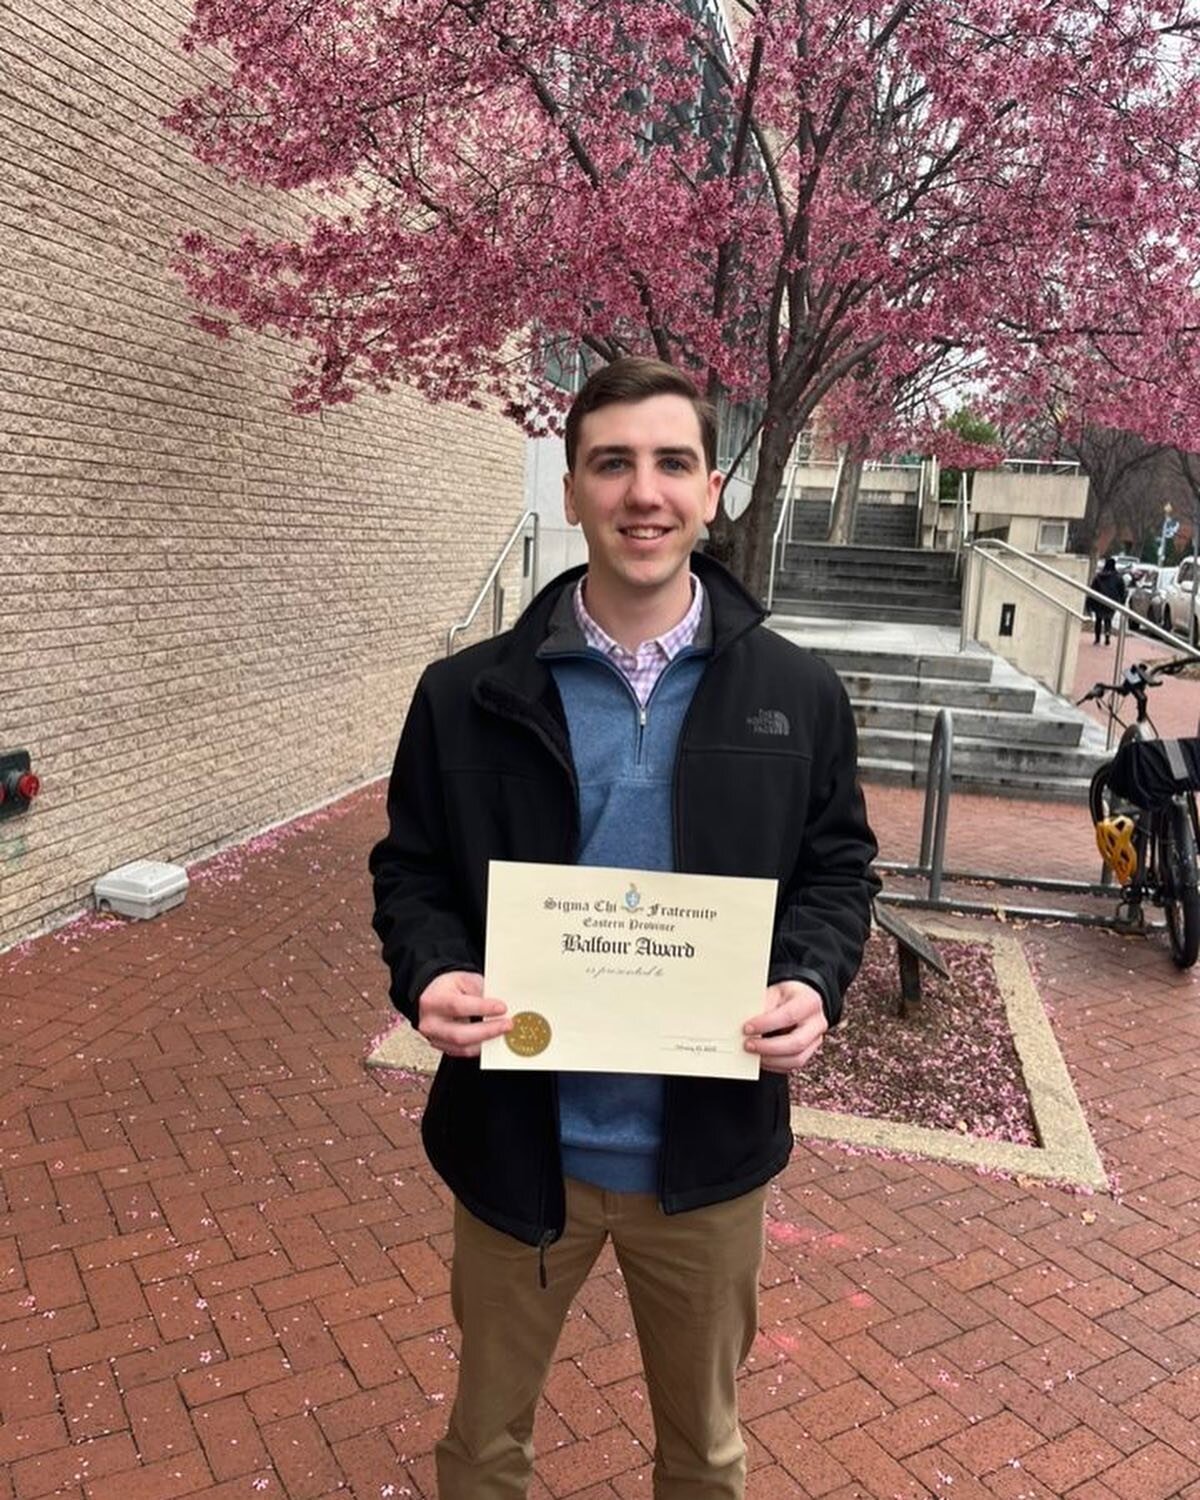 A very special congratulations to our own Brother, Founder Griffin McCombs for winning the Province Balfour Award. Griffin exemplifies what it means to be a Sig, championing the Mu Theta chapter into a reputable and highly respected fraternity. Throu